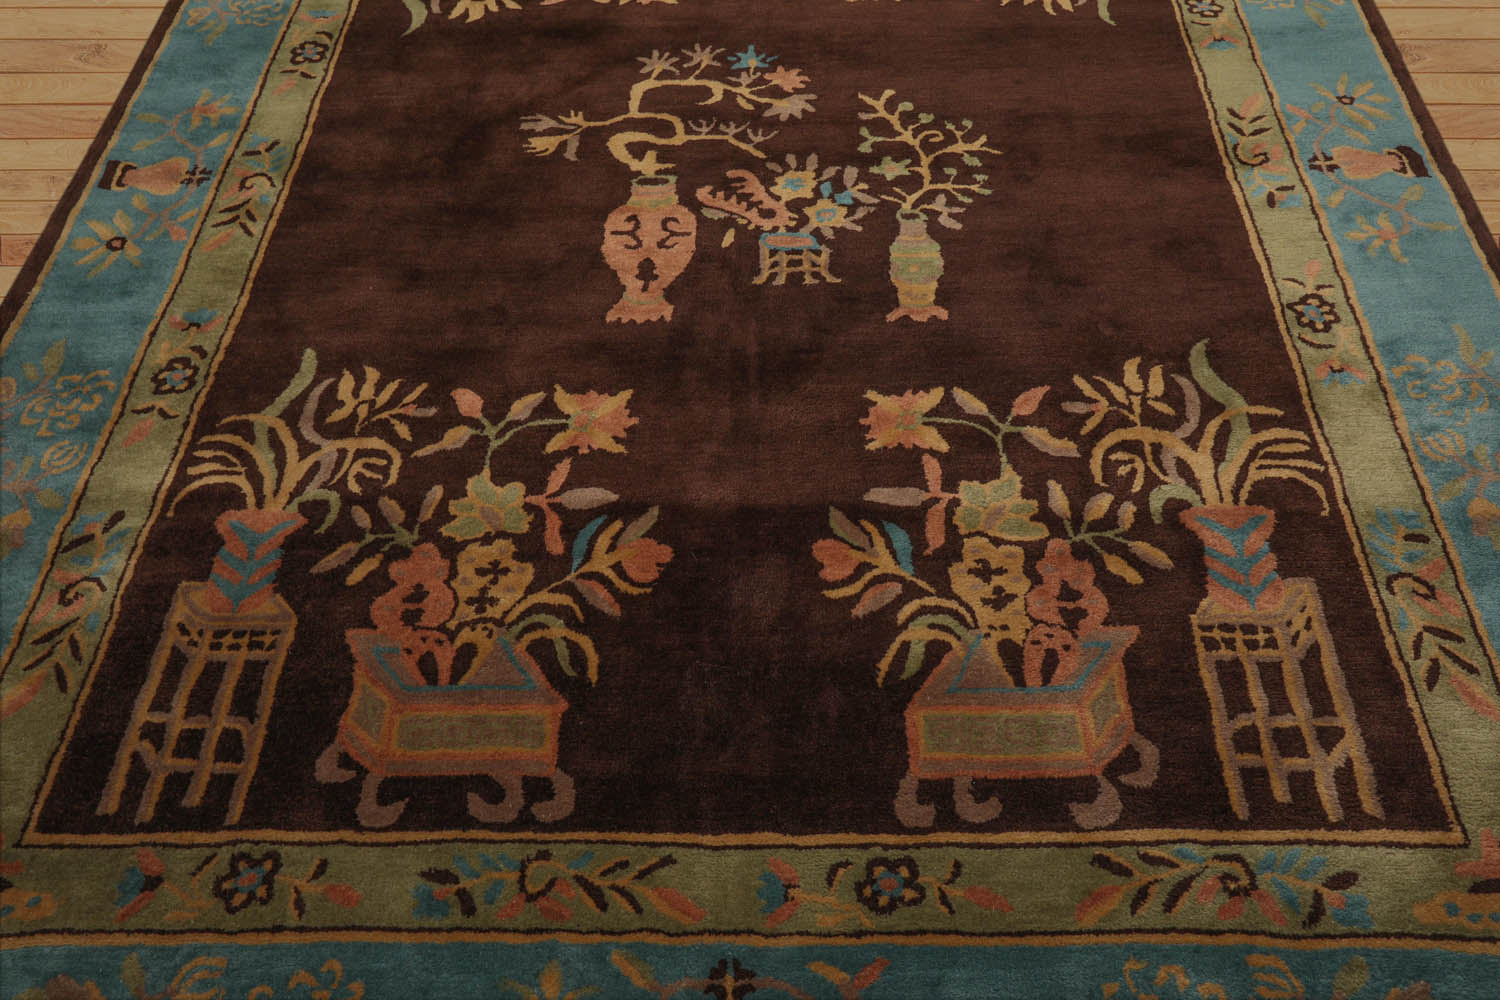 Multi Size Brown,Blue Hand Tufted Patterned 100% Wool Art Deco Oriental Area Rug